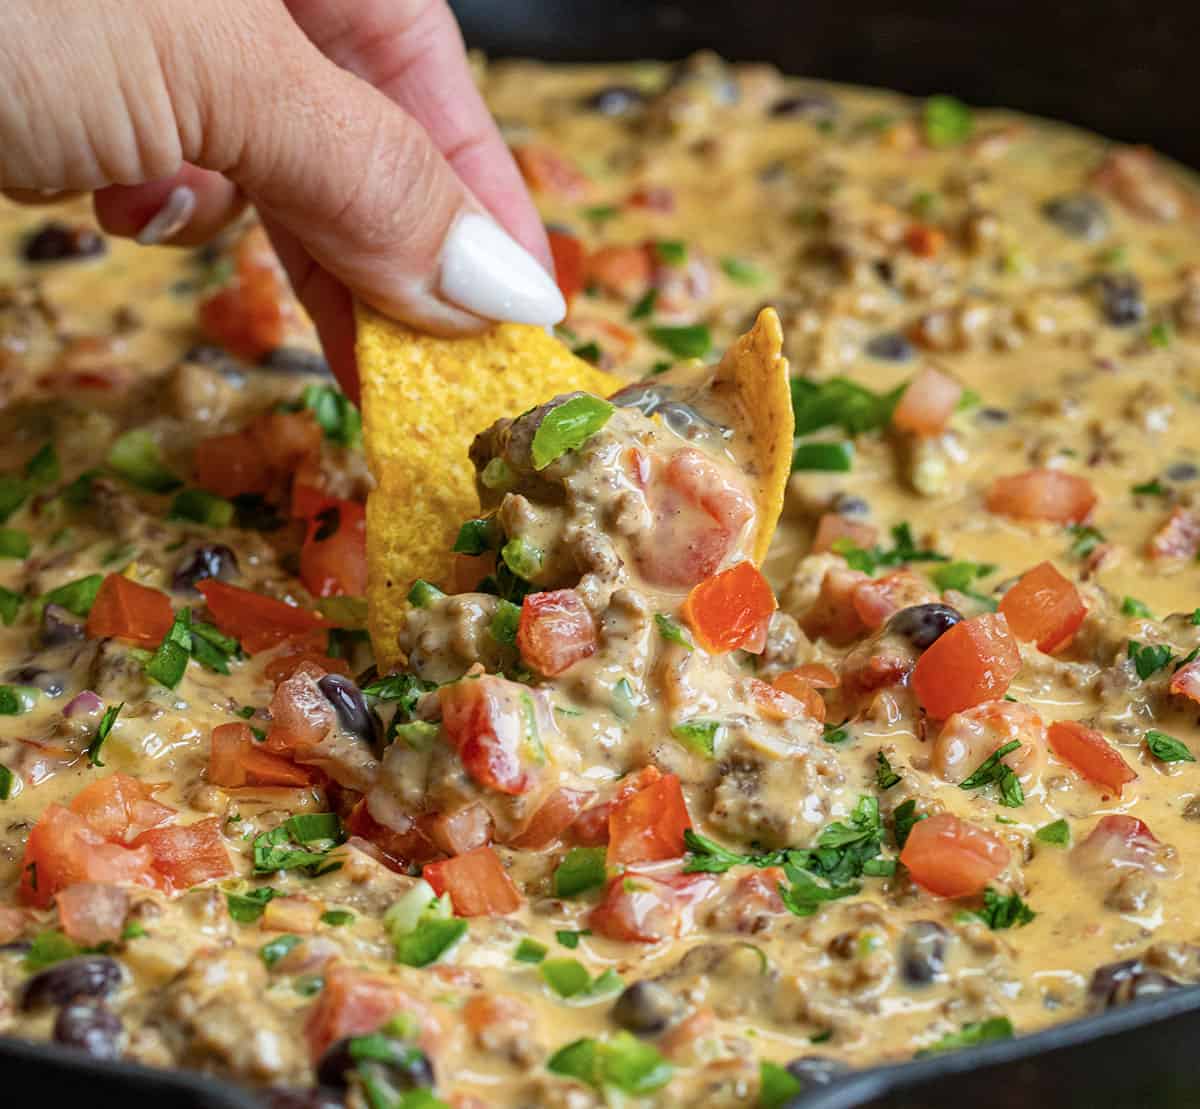 Dipping a chip into a skillet of Cowboy Queso topped with fresh tomato and jalapeno.